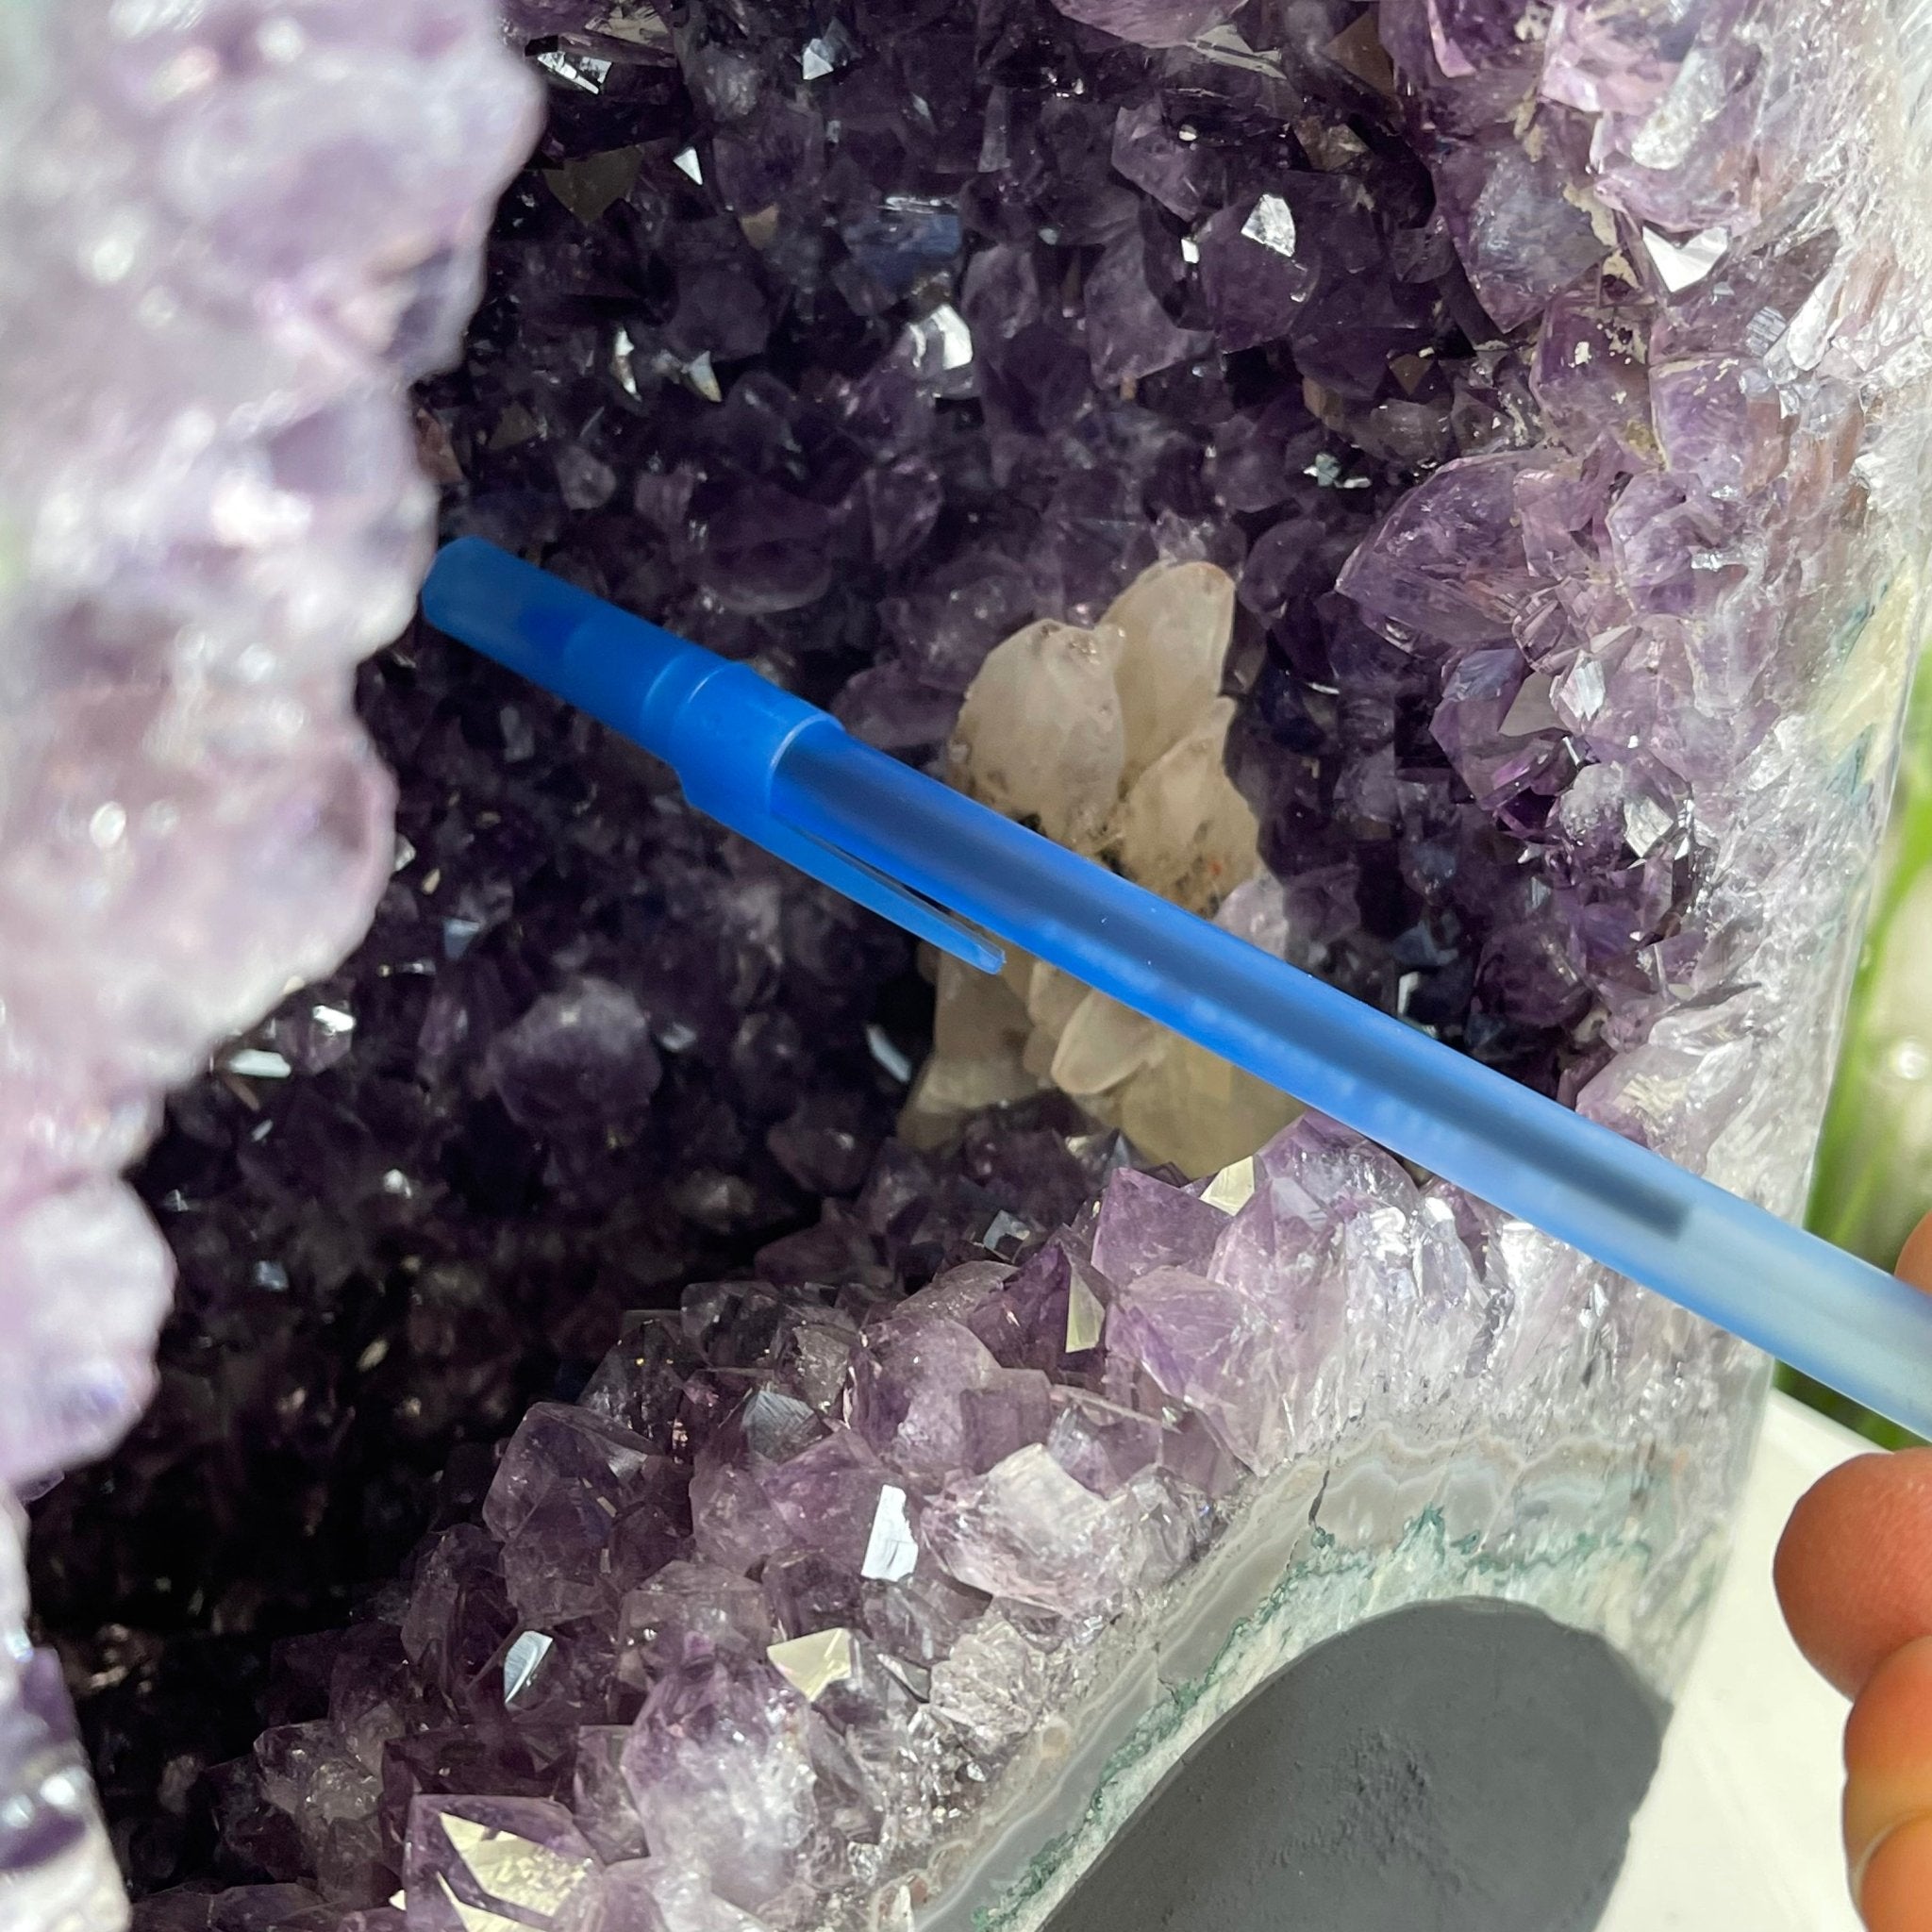 Extra Quality Brazilian Amethyst Cathedral, 30.7 lbs & 13.5" Tall #5601-1124 by Brazil Gems - Brazil GemsBrazil GemsExtra Quality Brazilian Amethyst Cathedral, 30.7 lbs & 13.5" Tall #5601-1124 by Brazil GemsCathedrals5601-1124